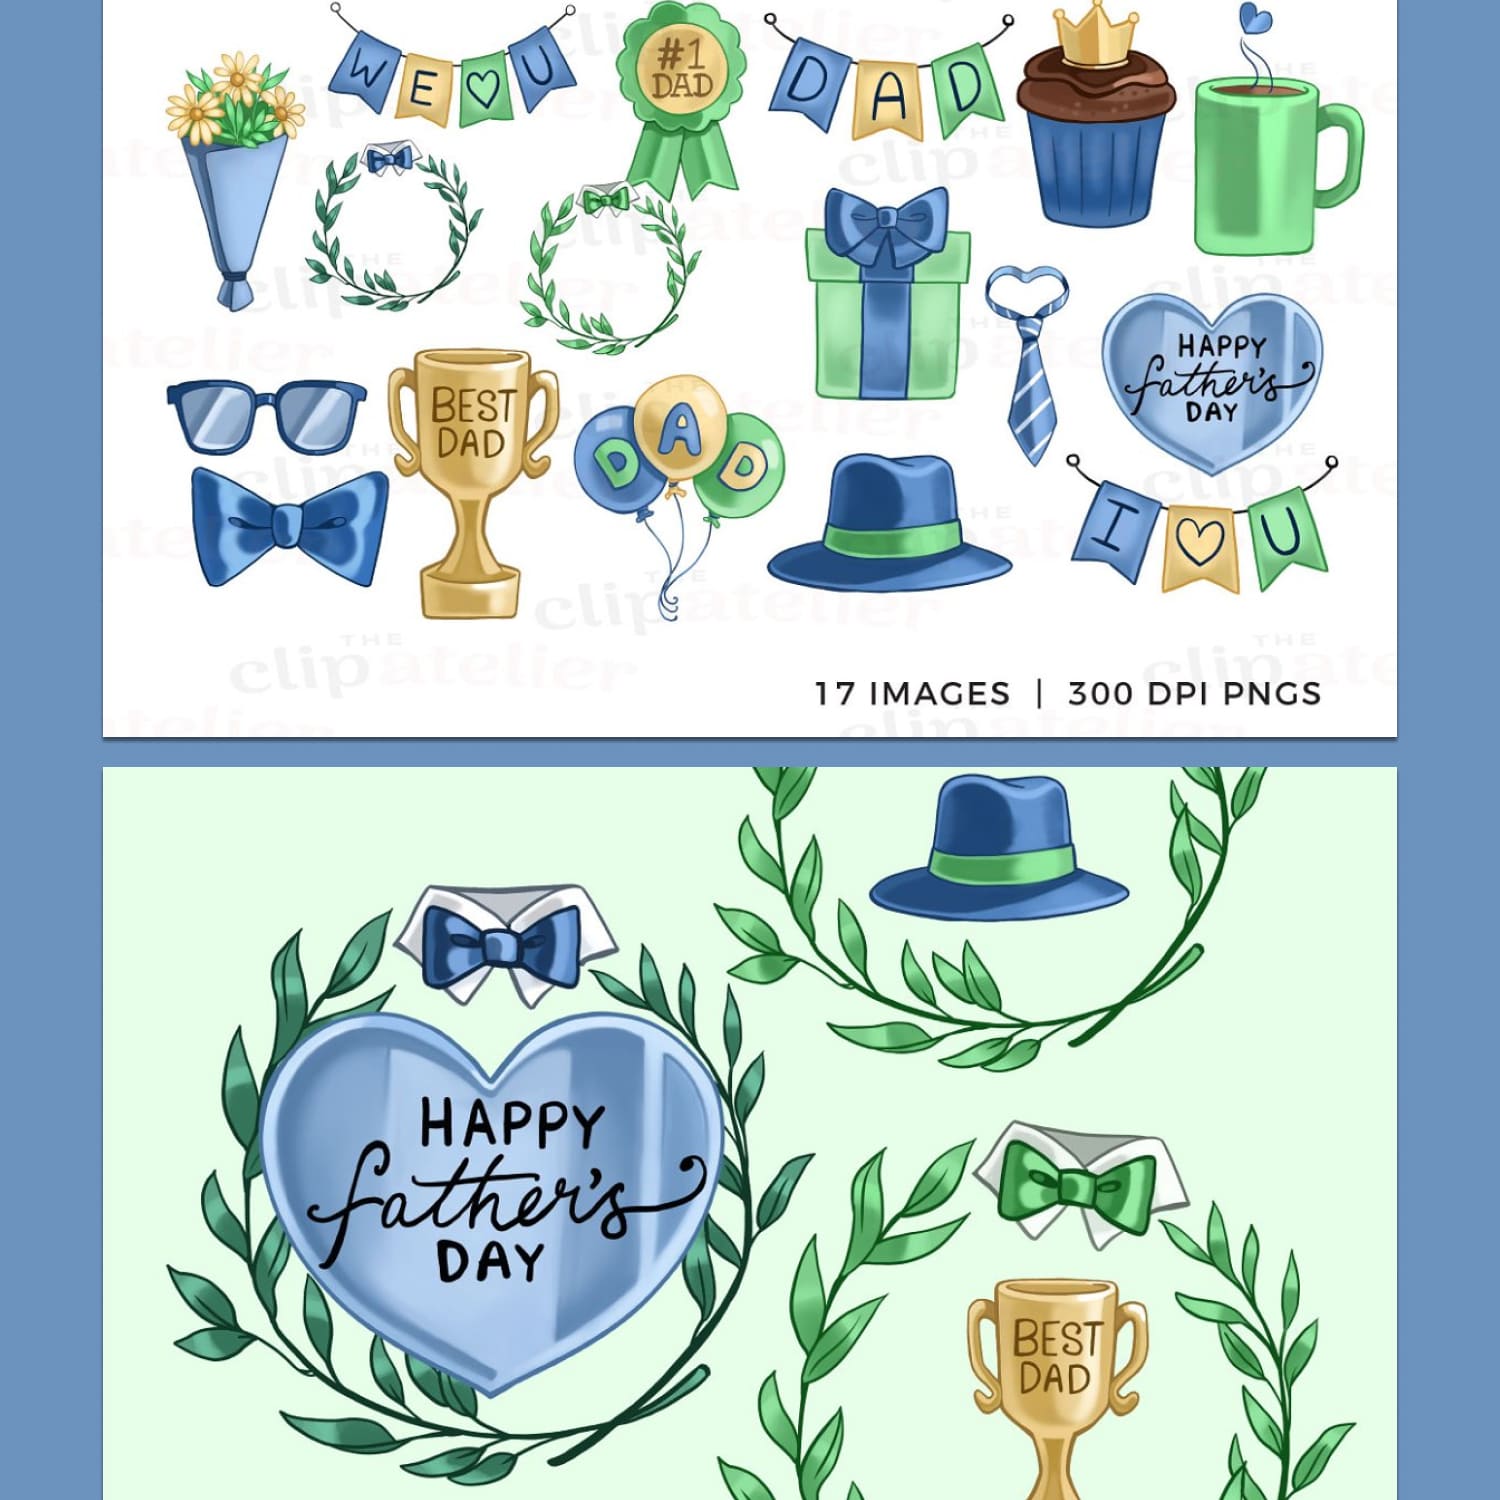 Father's Day Clipart created by TheClipAtelier.